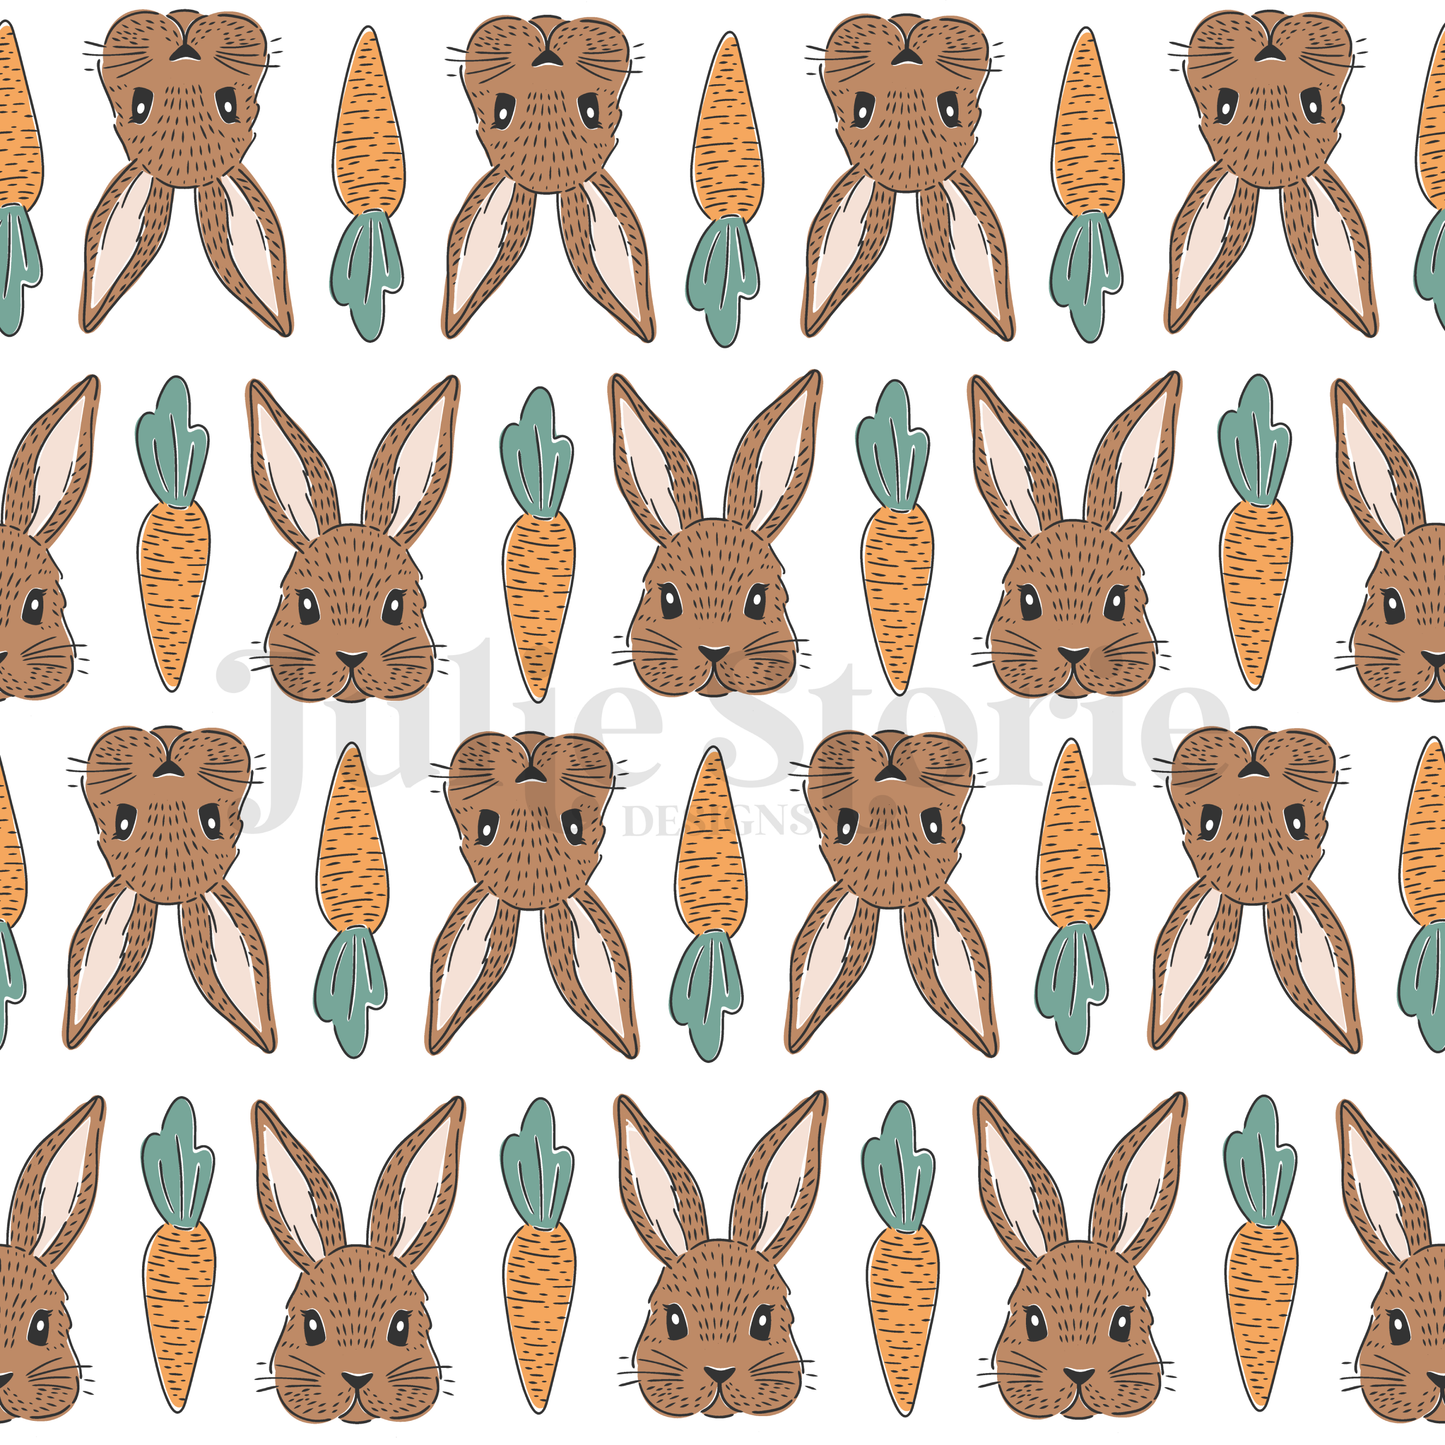 Bunnies and Carrots on White